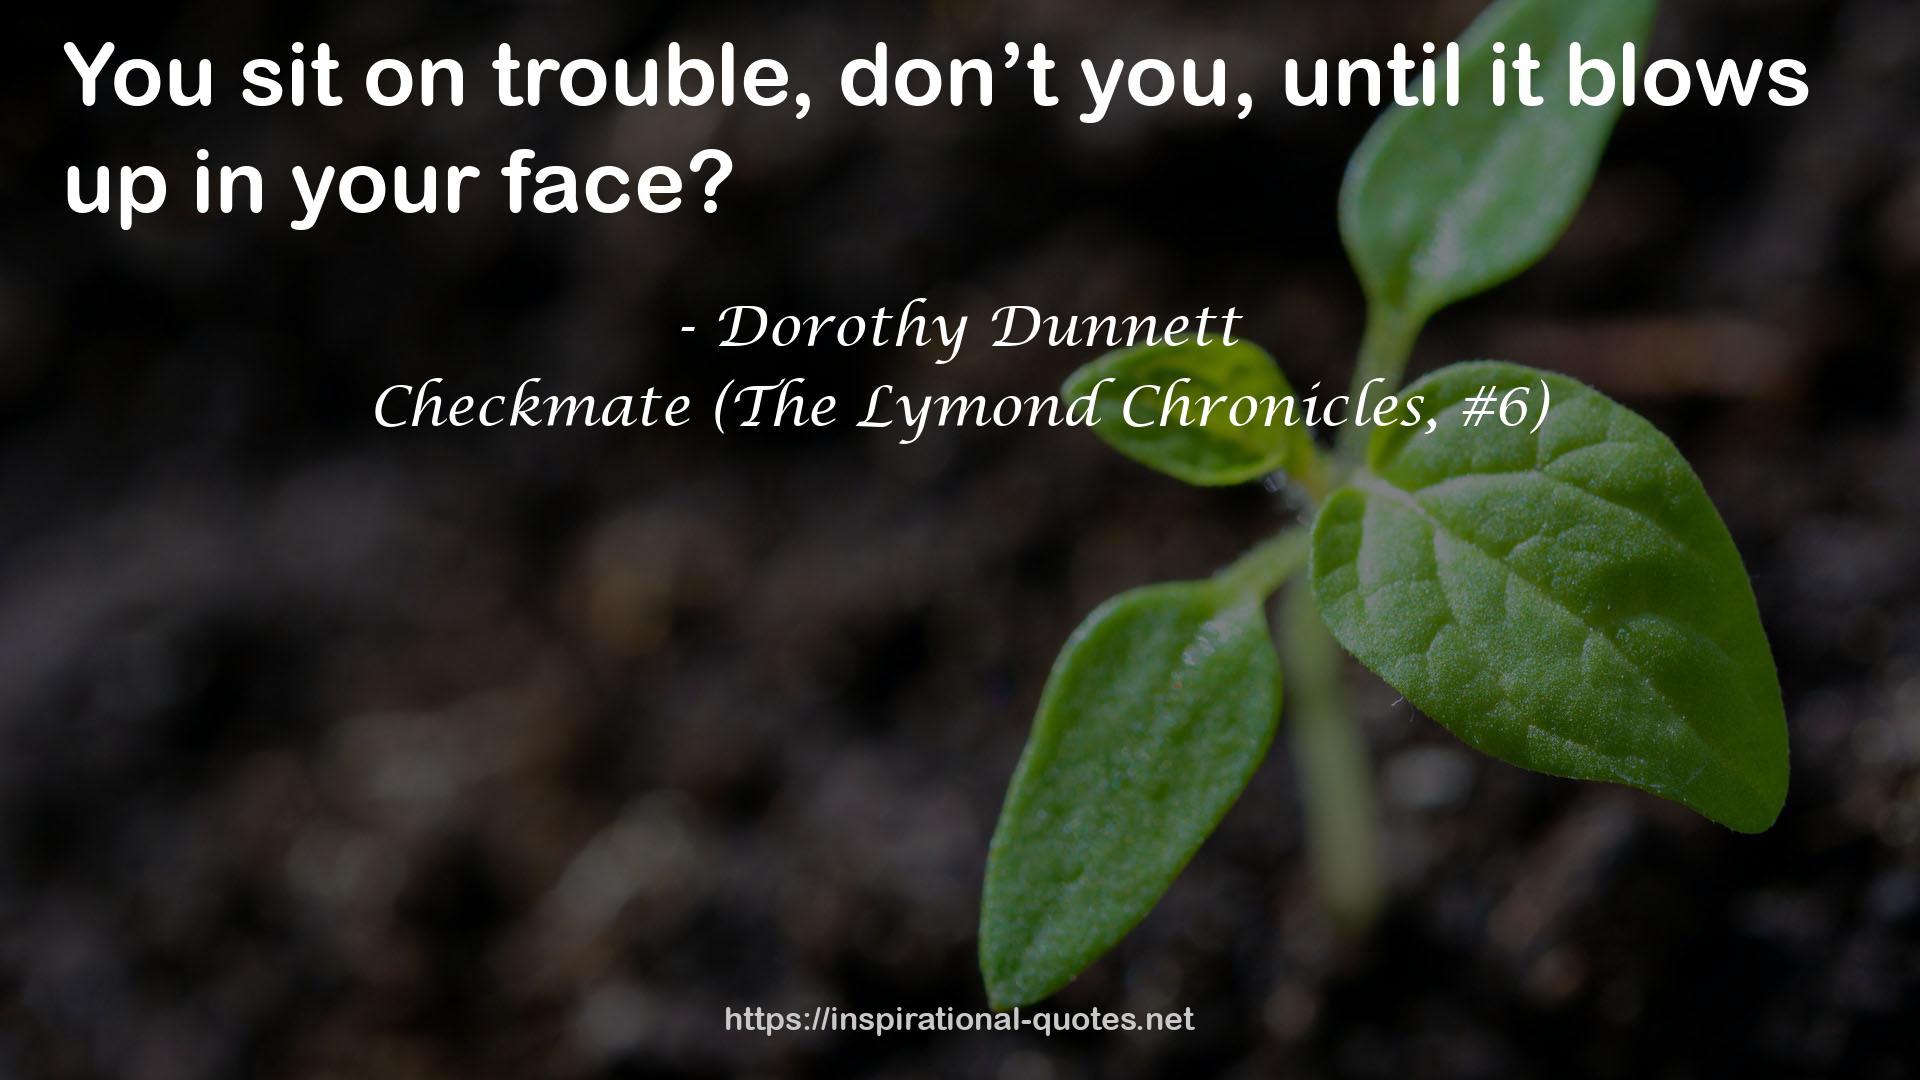 Checkmate (The Lymond Chronicles, #6) QUOTES